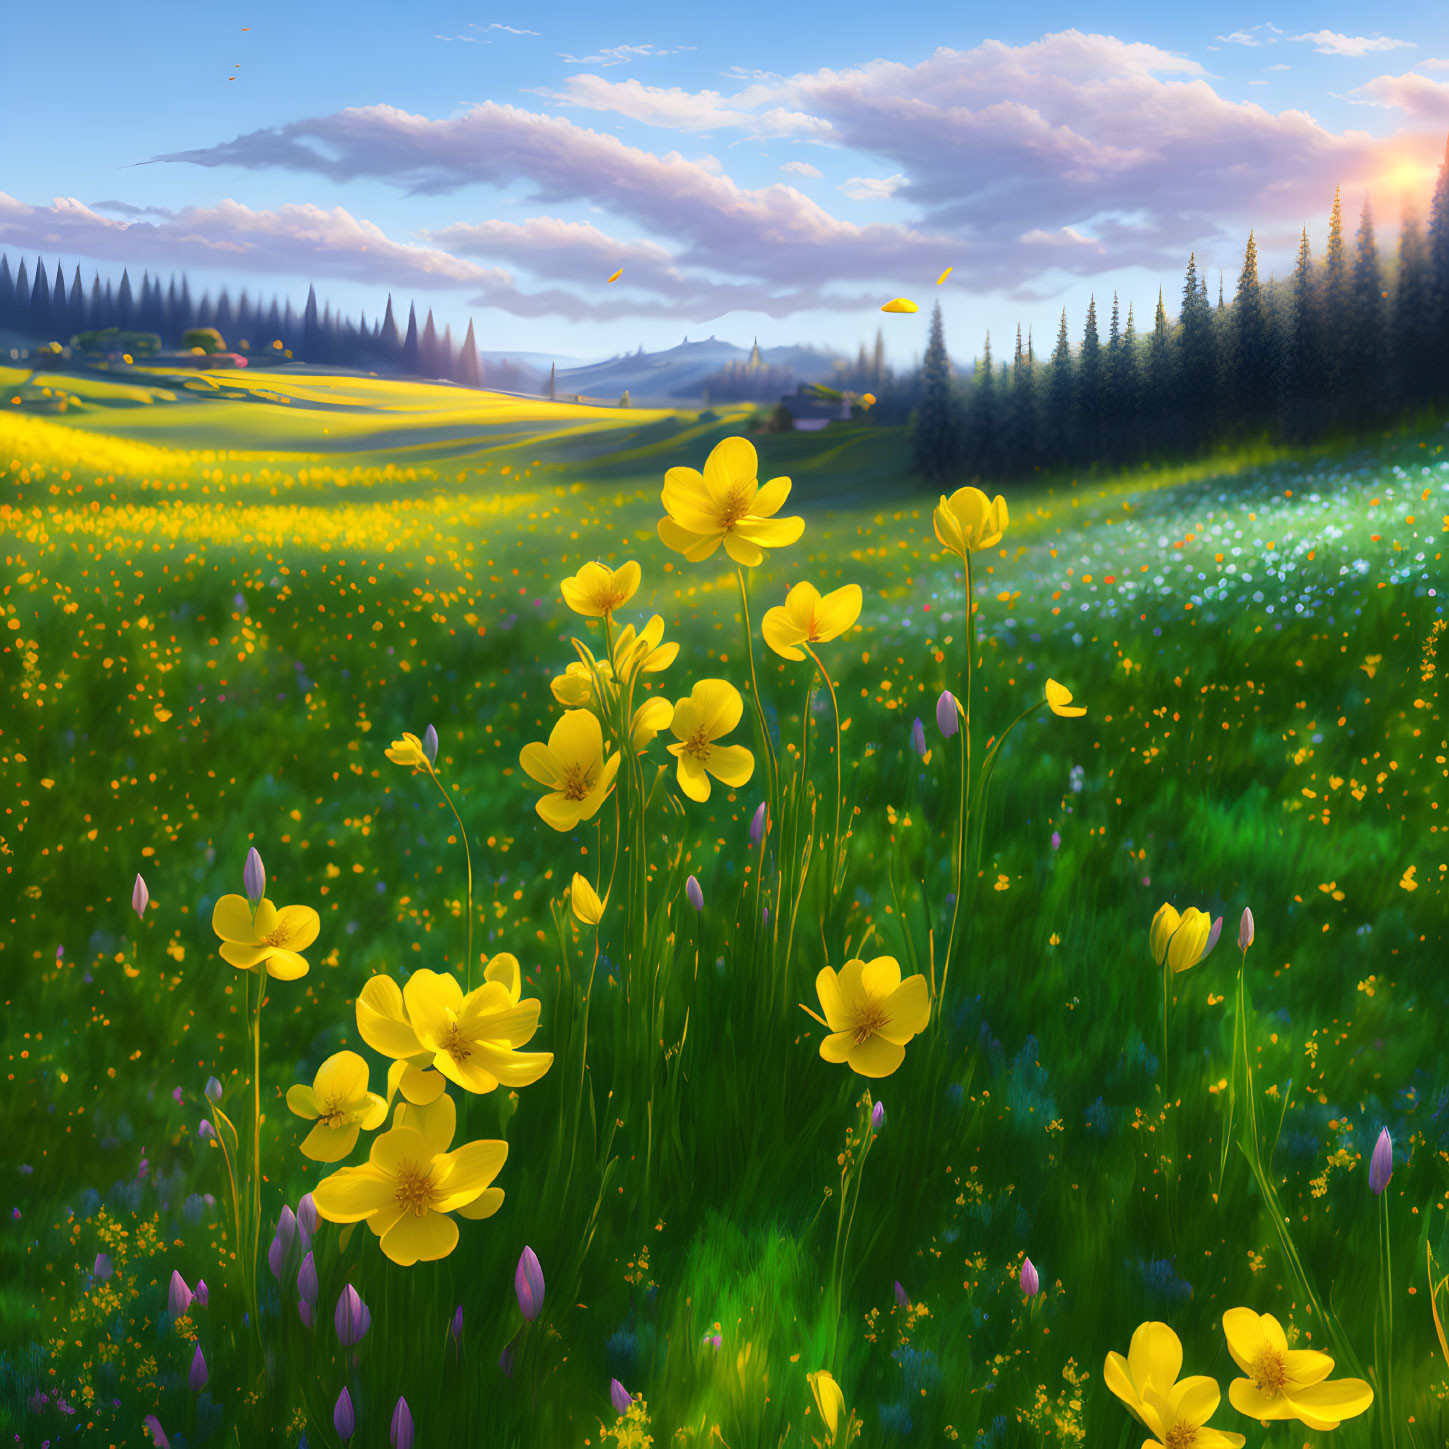 Scenic landscape of yellow flowers, green trees, and distant mountains under a bright, cloudy sky